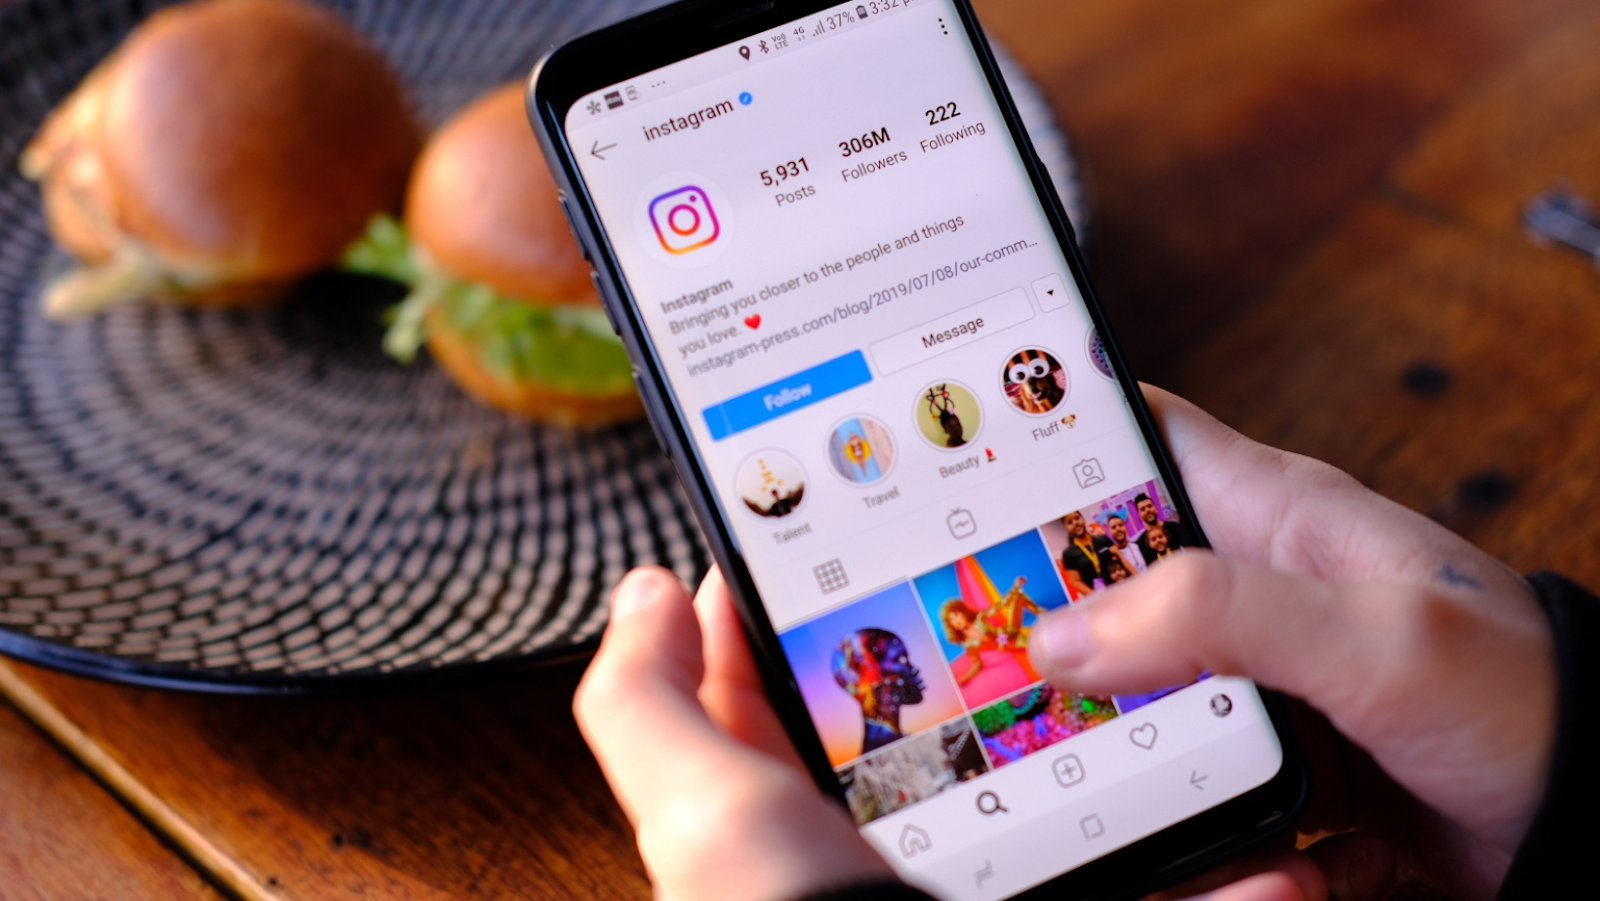 How to unmute a private story on Instagram